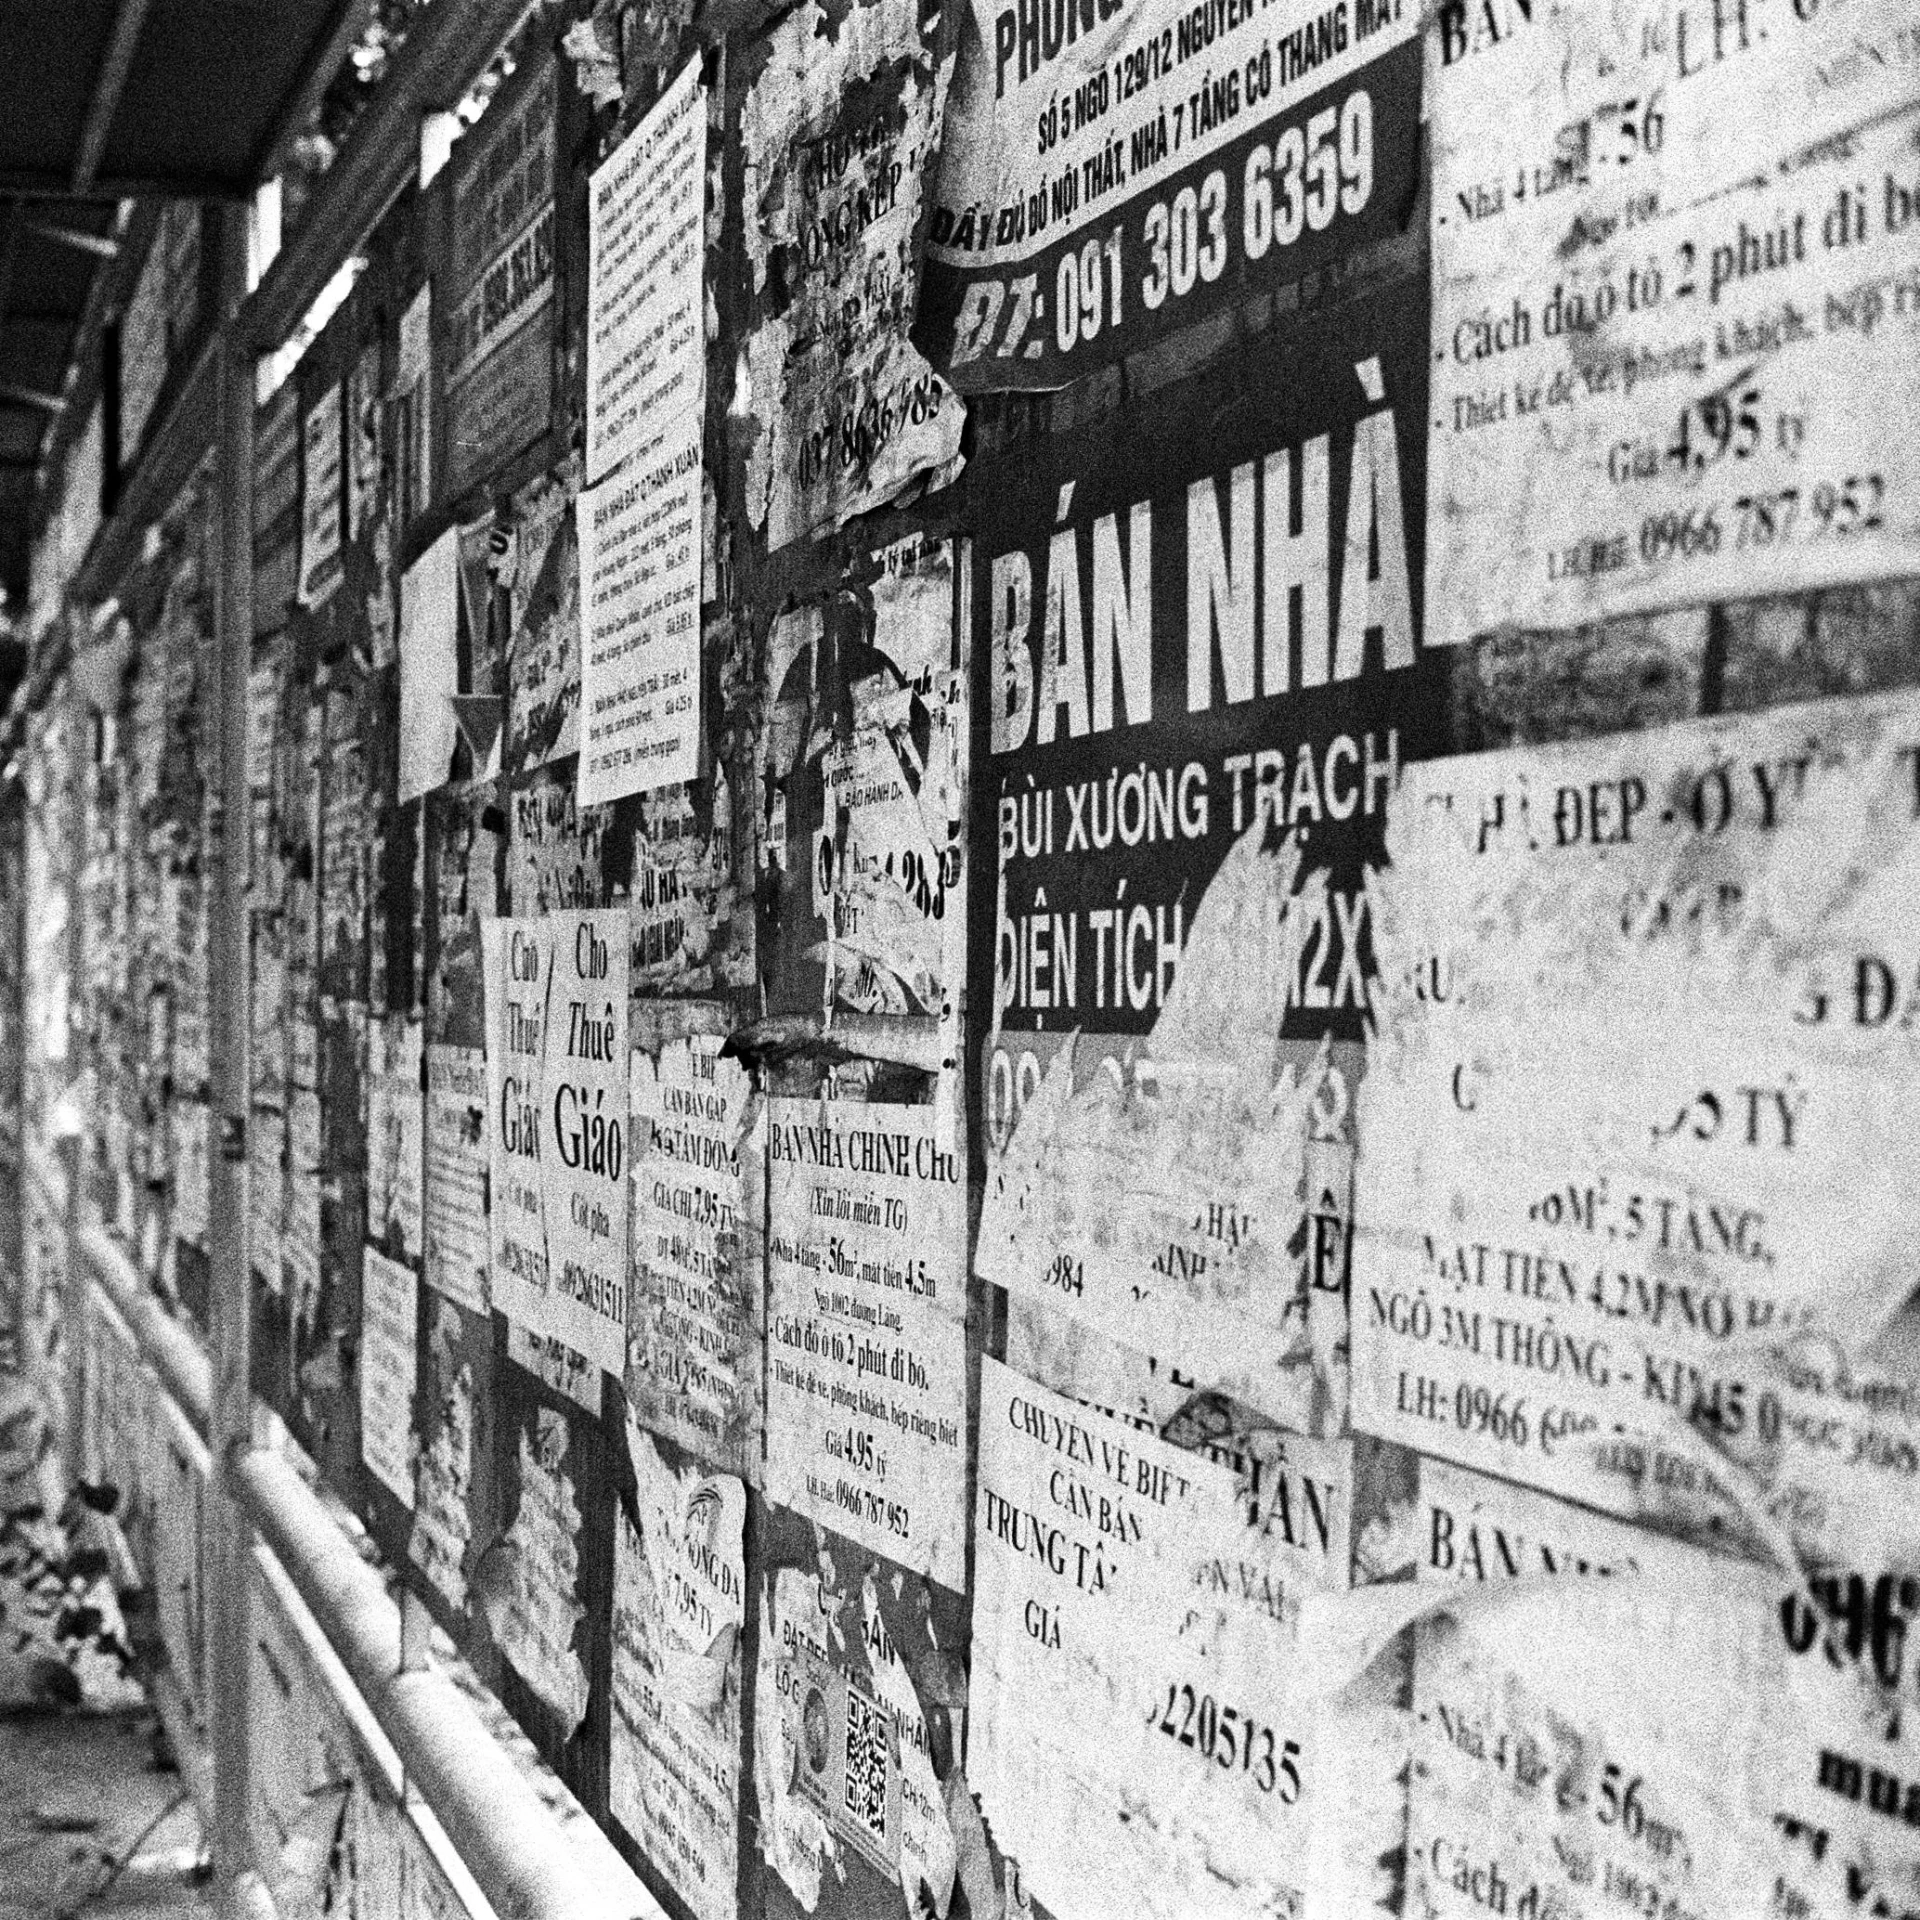 the wall covered with a lot of posters that are written